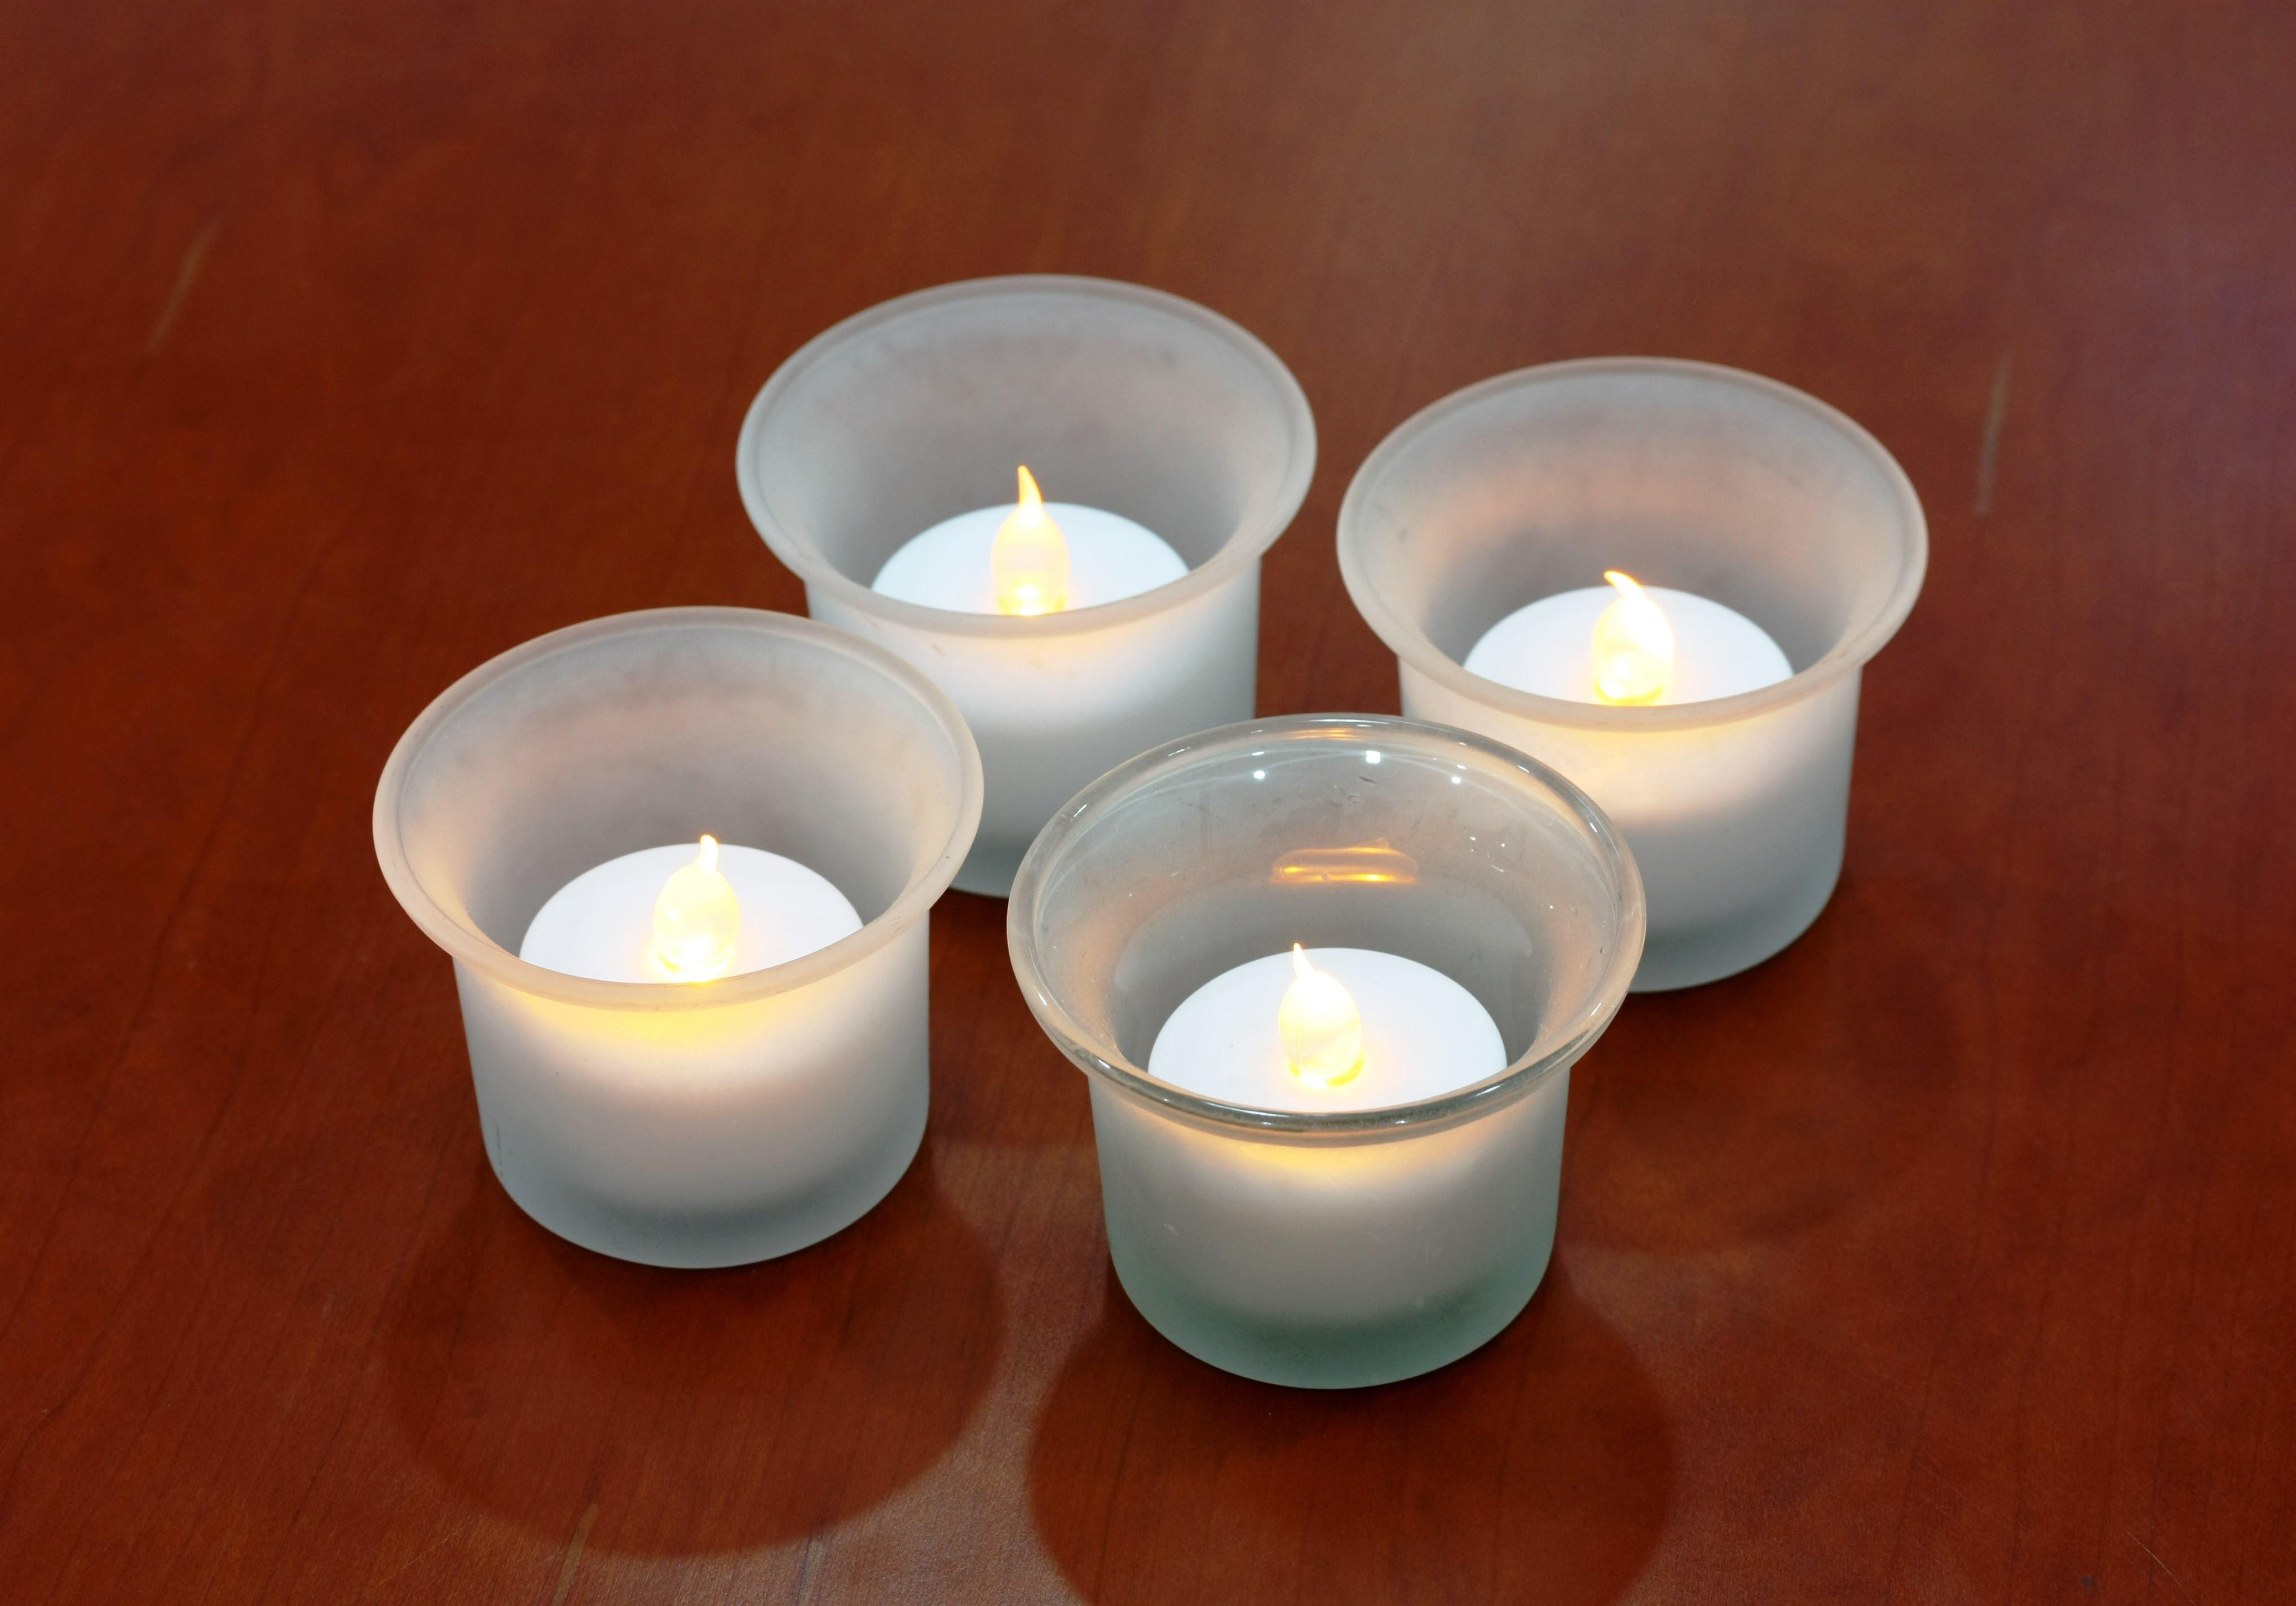 Mainstays Flameless LED Tea Lights, 36 Count - image 3 of 4